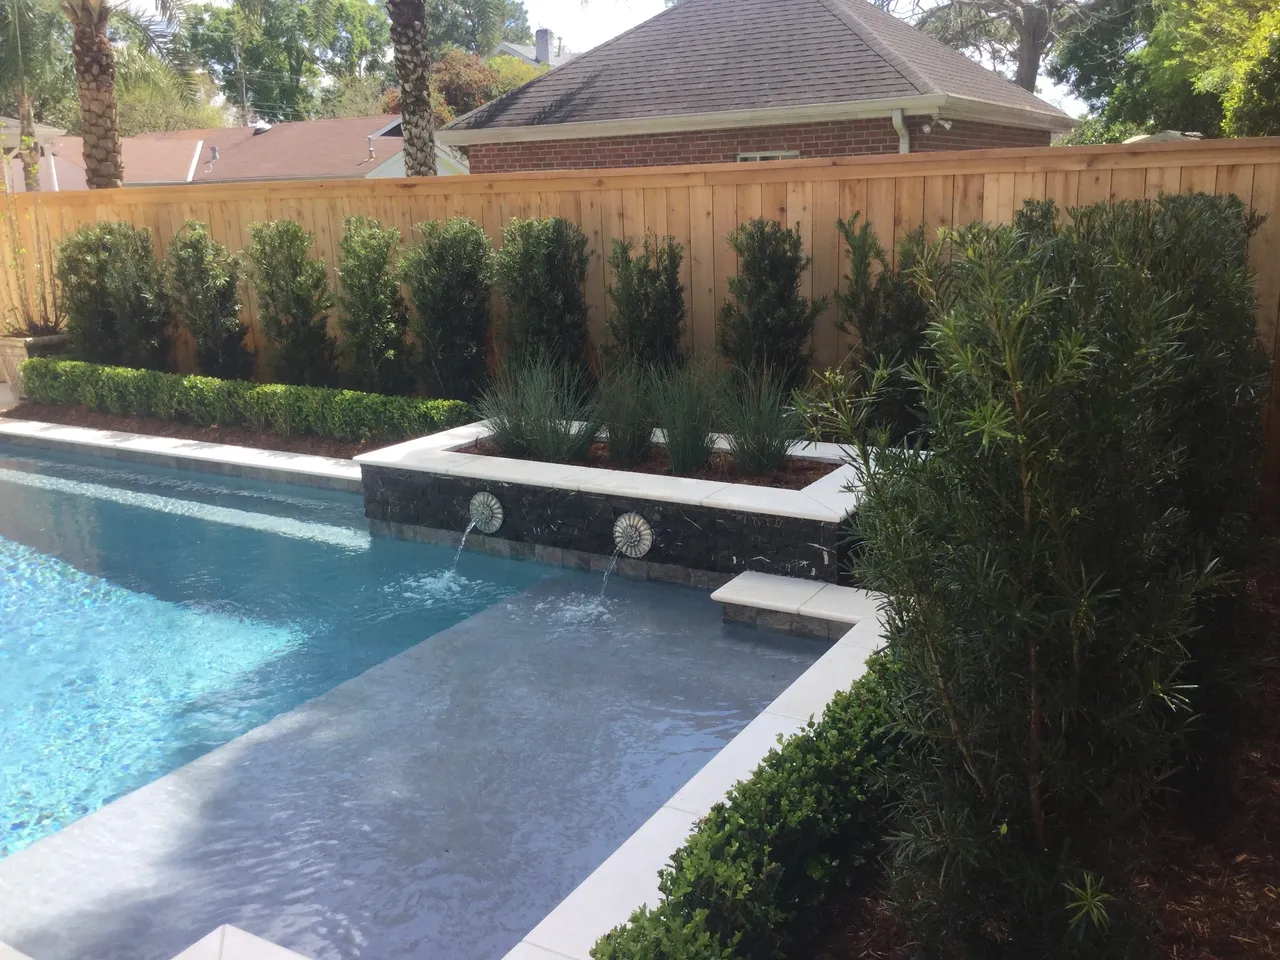 Poolscape Design – Transform Your Backyard Pool into a Summer Oasis